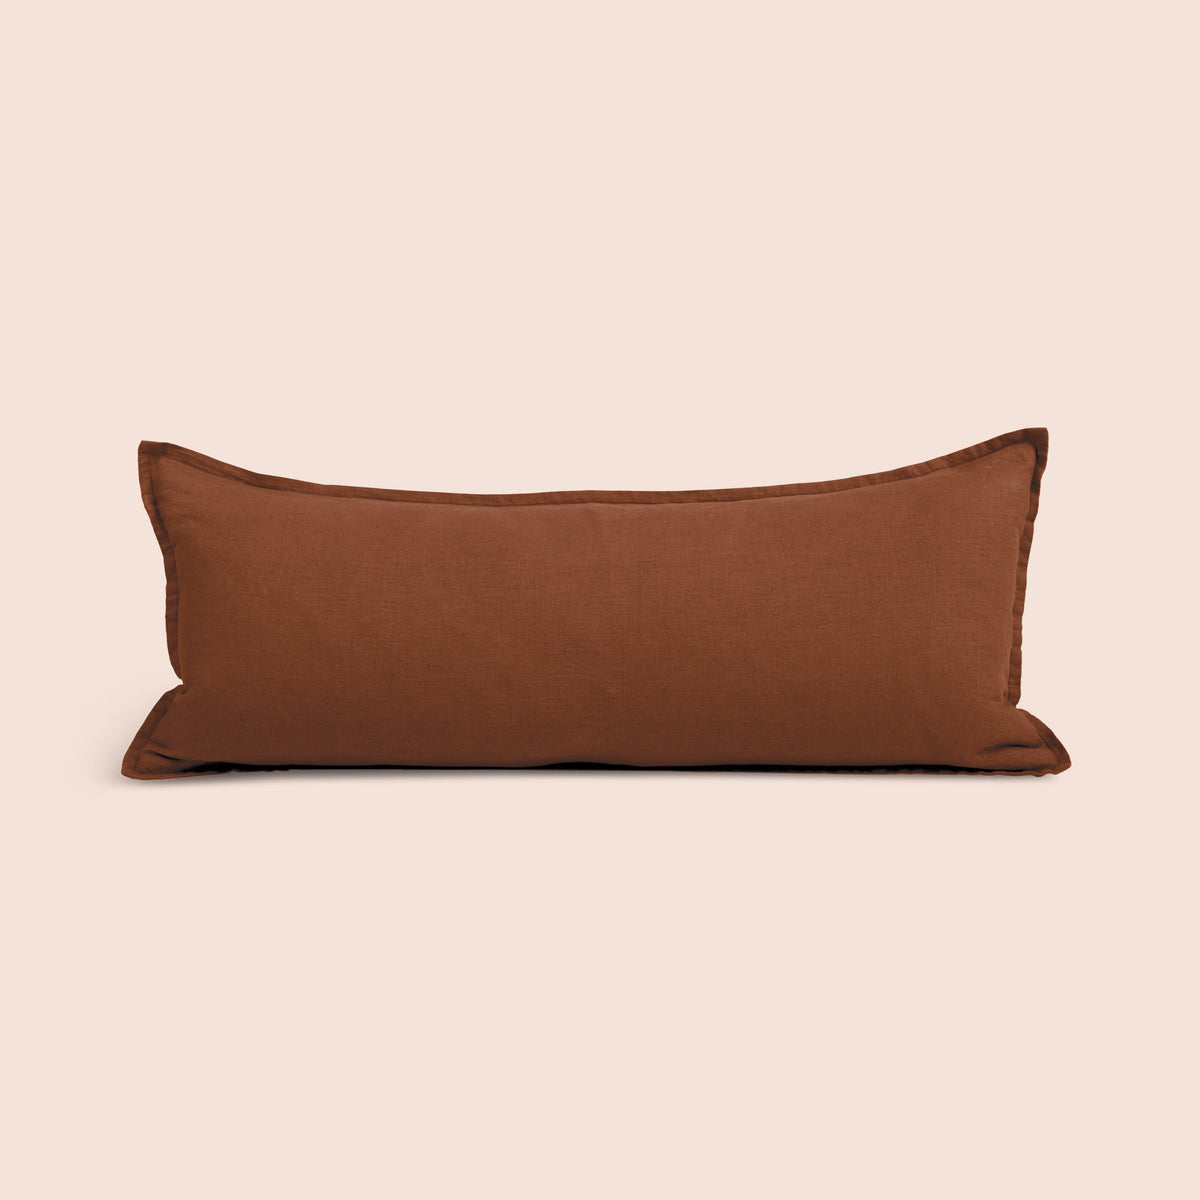 Image of Cacao Blended Linen Lumbar Pillow Cover on a lumbar pillow with a light pink background